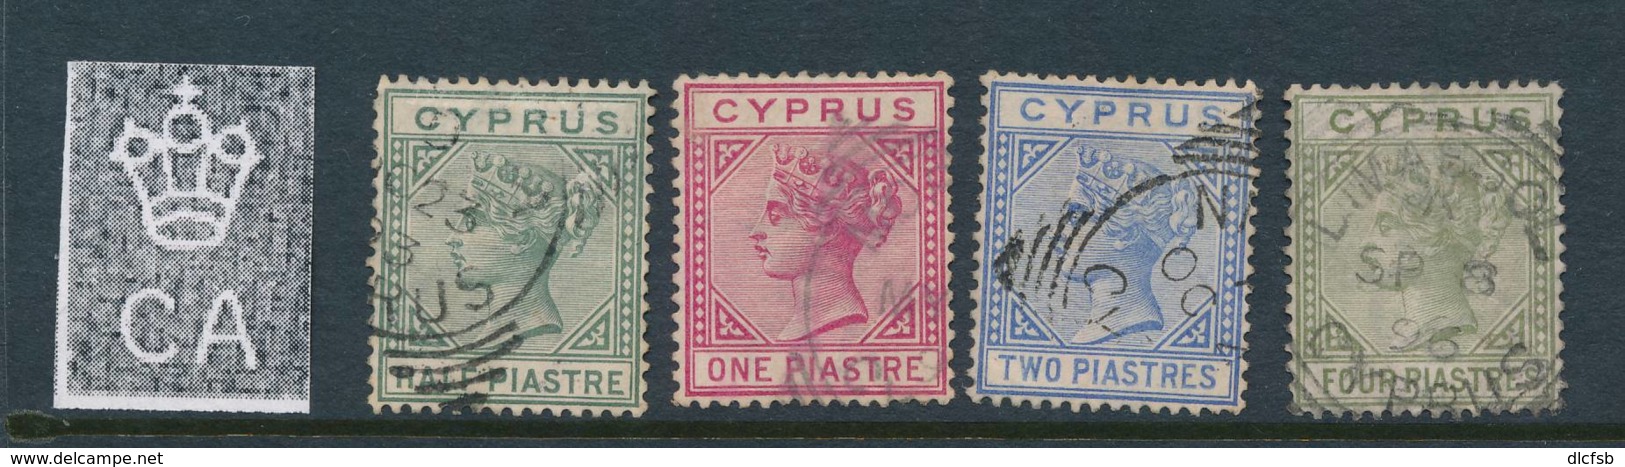 CYPRUS, 1892 To 4Pi (DIE 2) 4Pi Has Thin, Others Fine Used, Cat £65 - Cyprus (...-1960)